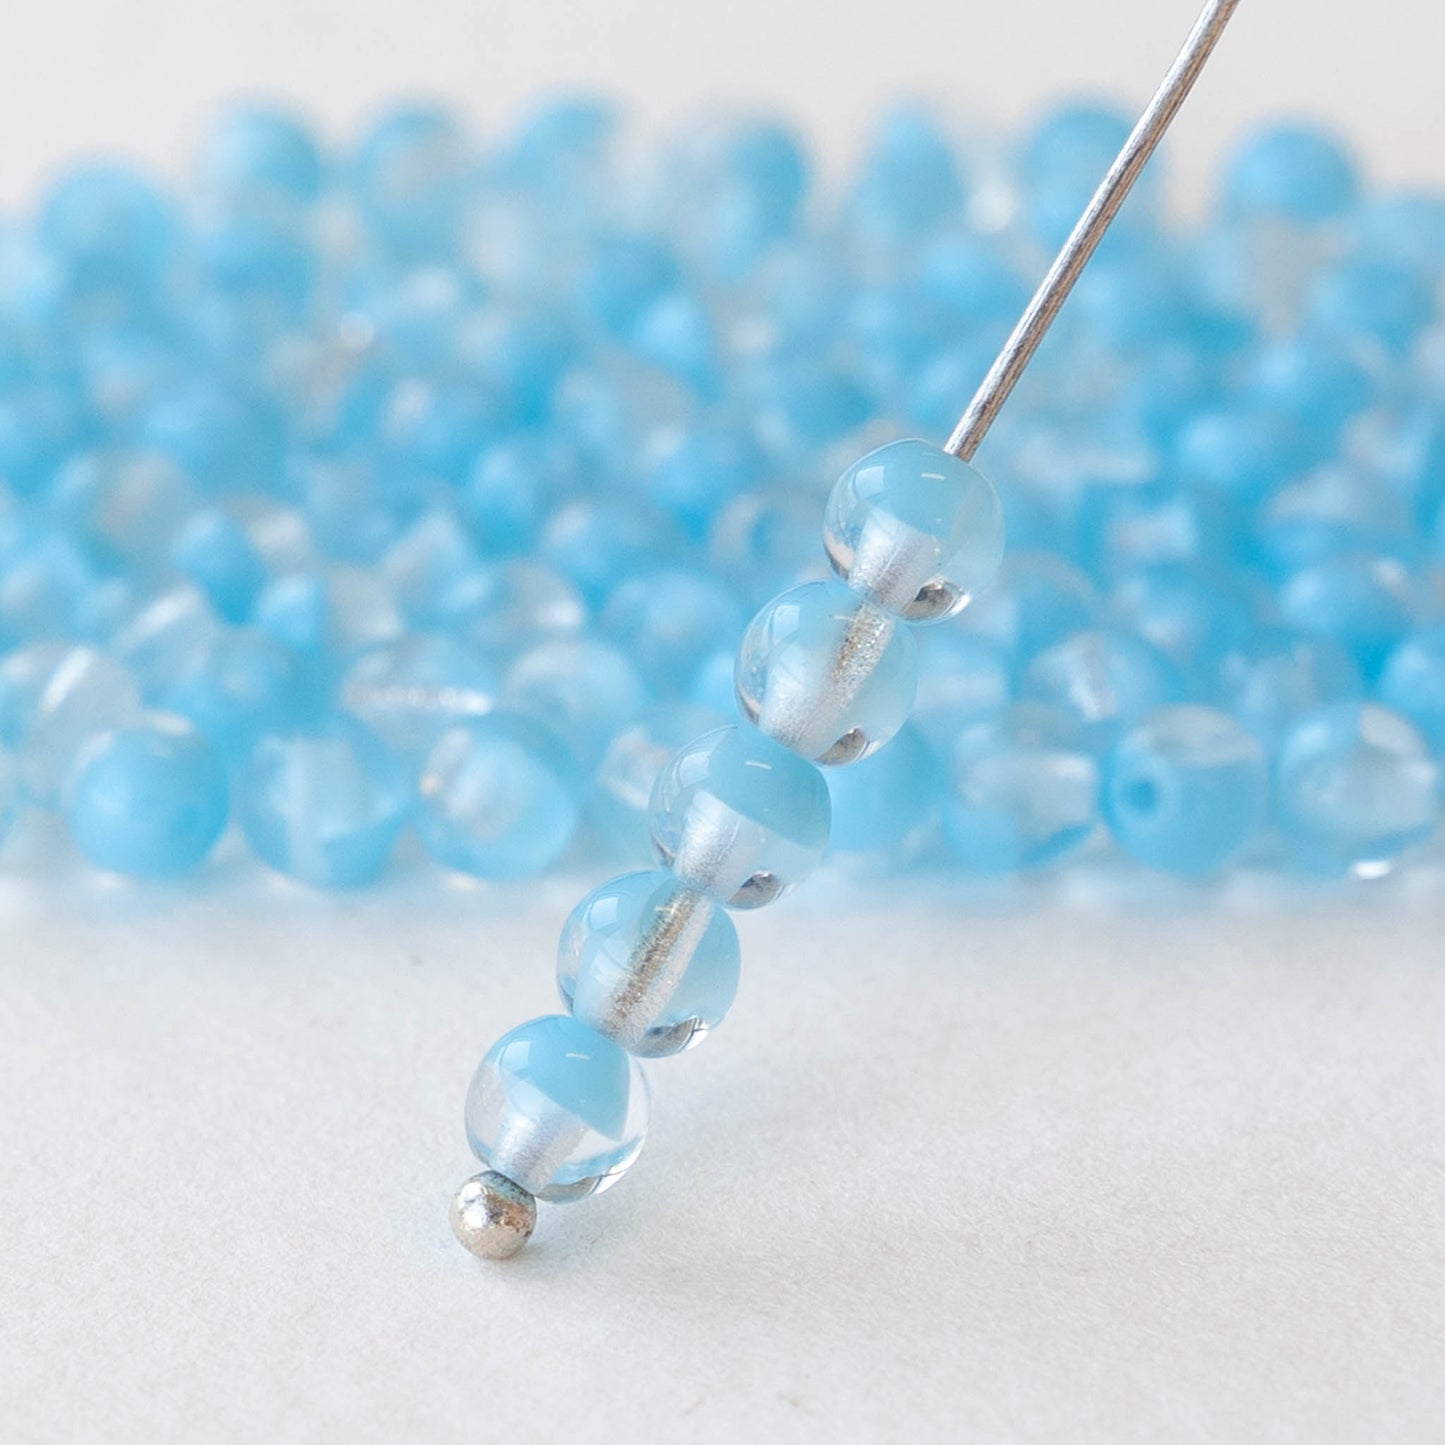 Load image into Gallery viewer, 4mm Round Glass Beads - Blue Crystal Marble - 100 Beads
